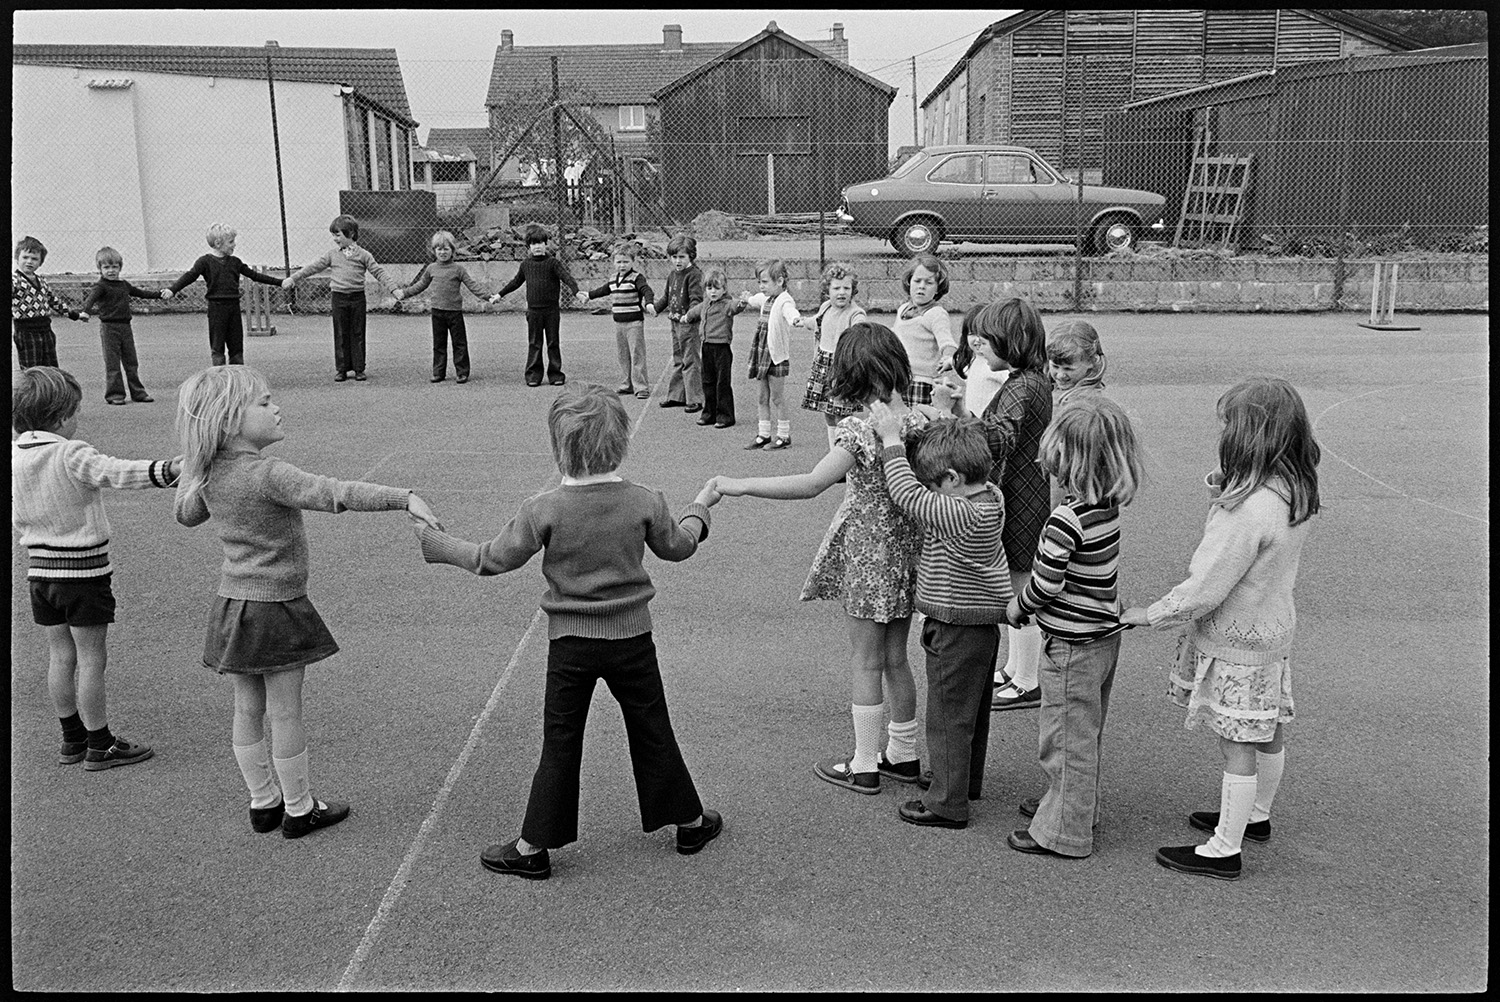 Children playing in school playground. 
[School children playing in Beaford Primary School playground. They are holding hands in a circle while other children line up behind the children in the circle.]